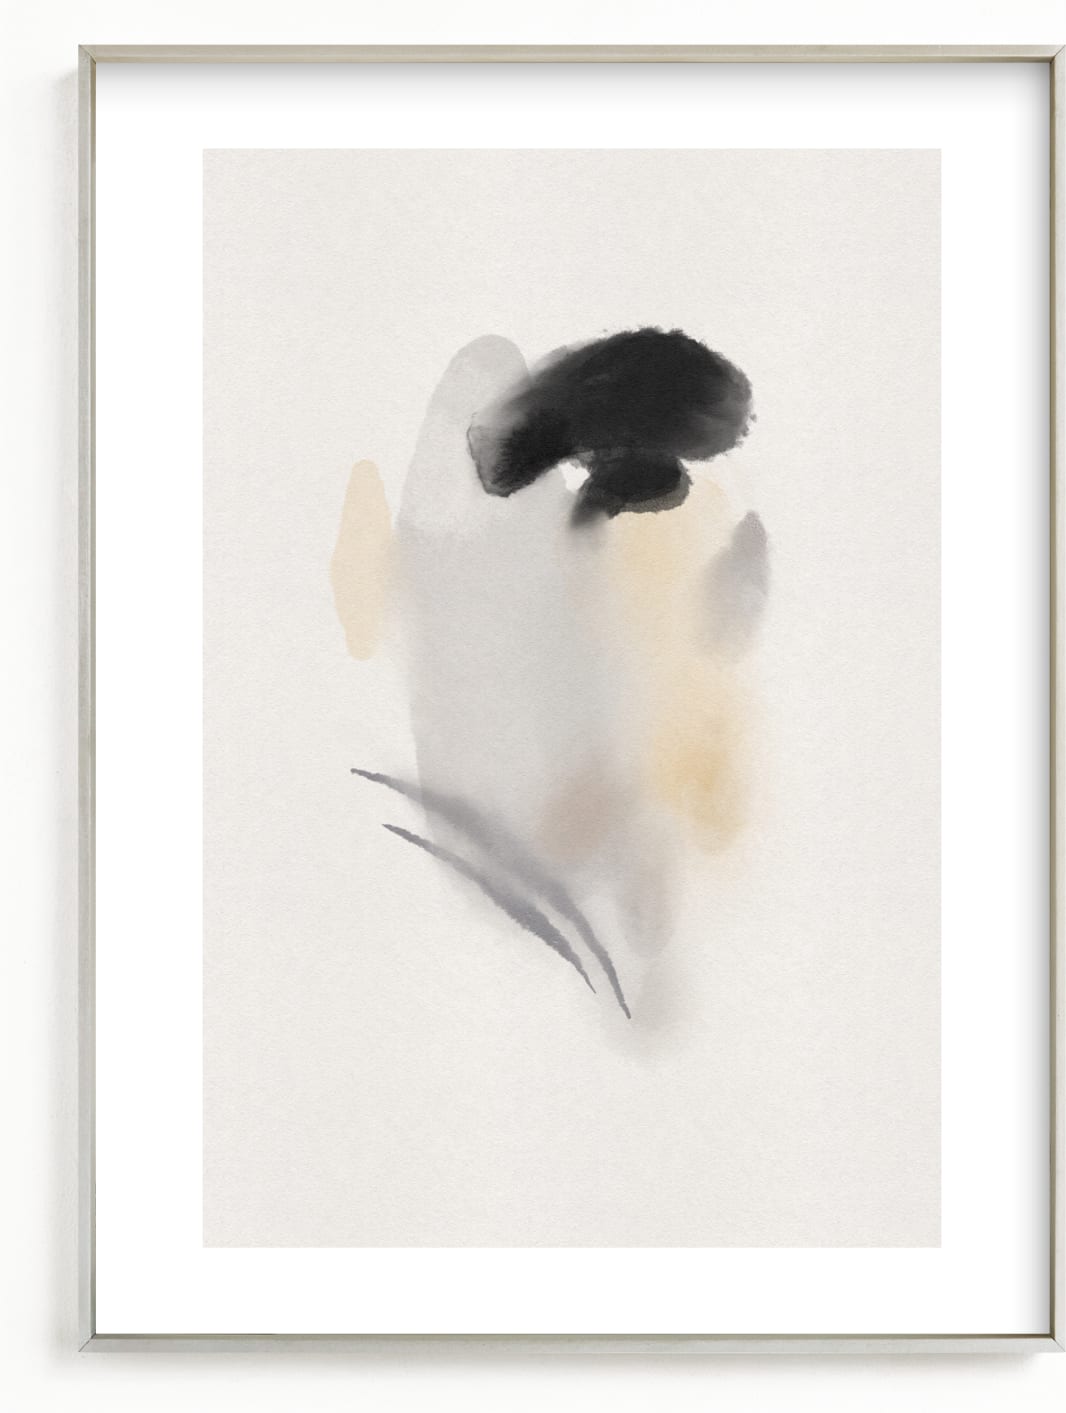 This is a black and white kids wall art by Christa Kimble called Chickadee.